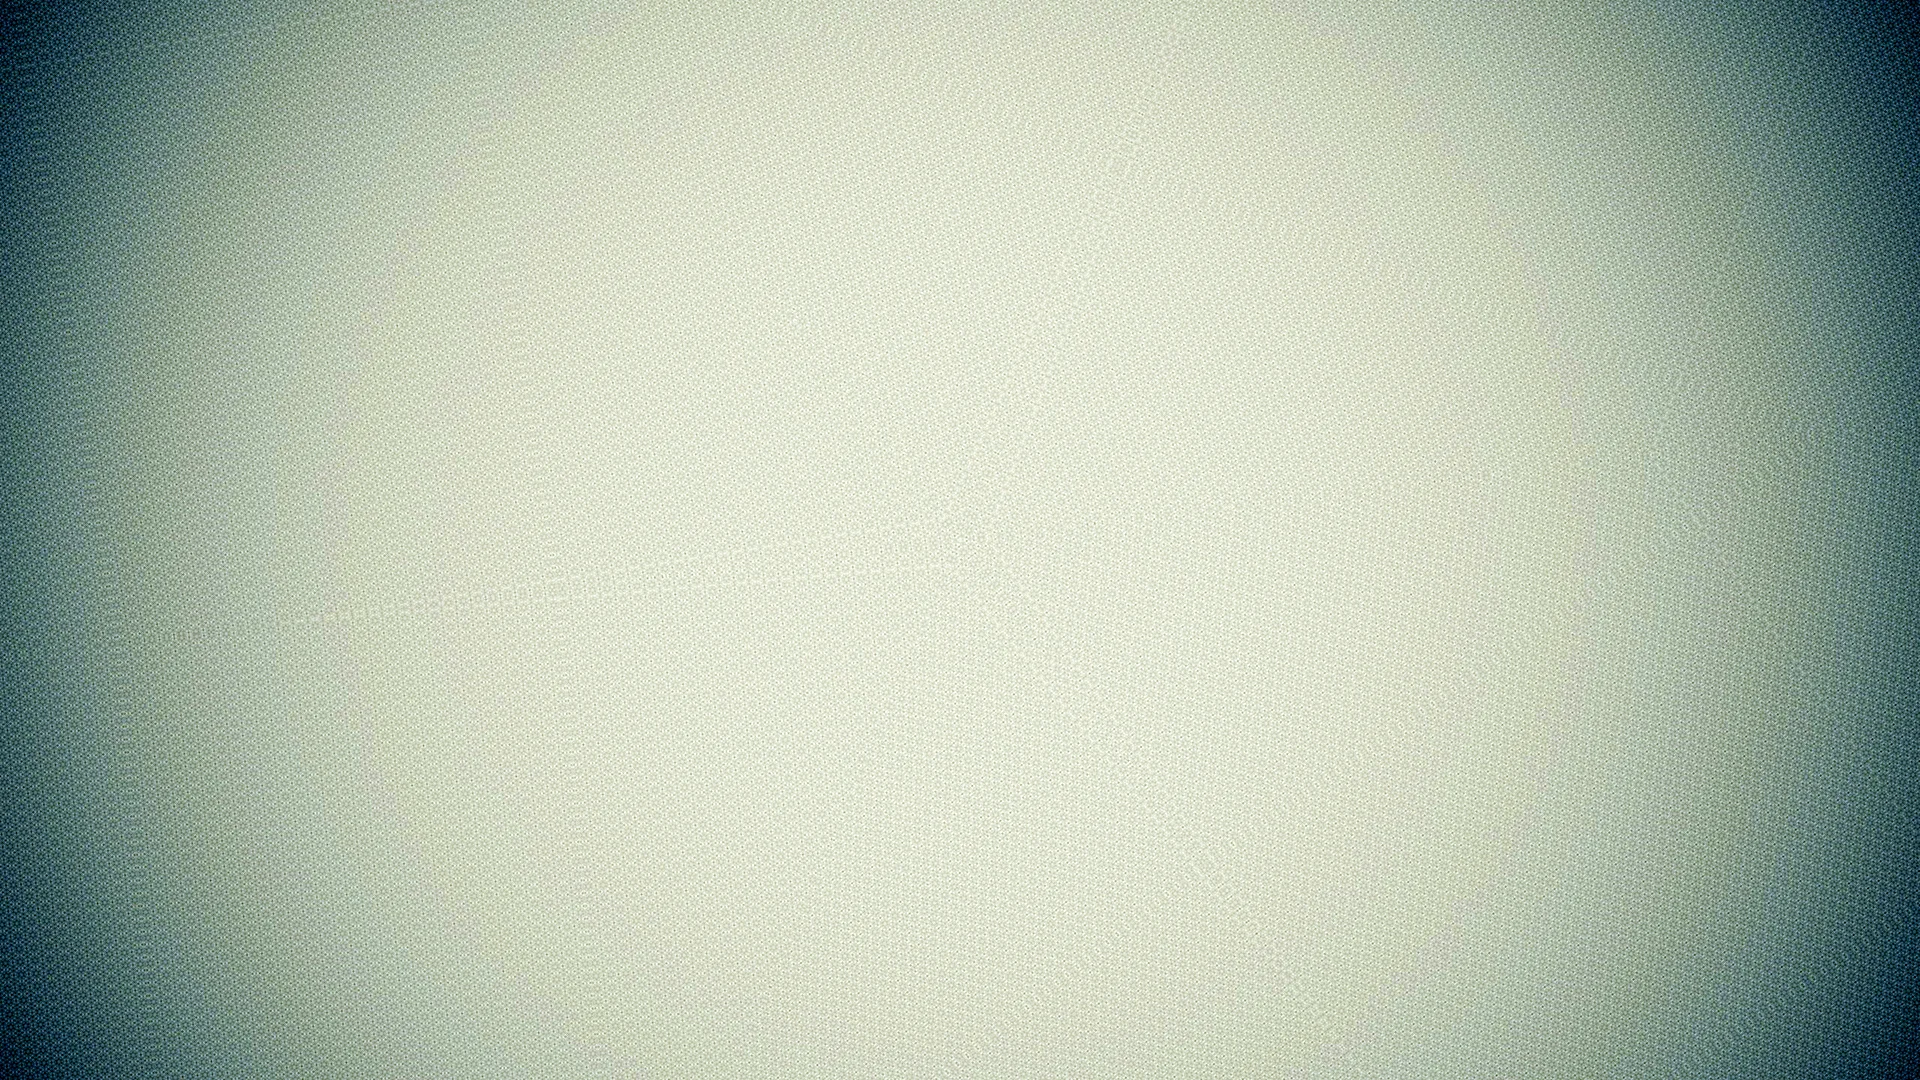 Green And White Gradient Wallpaper